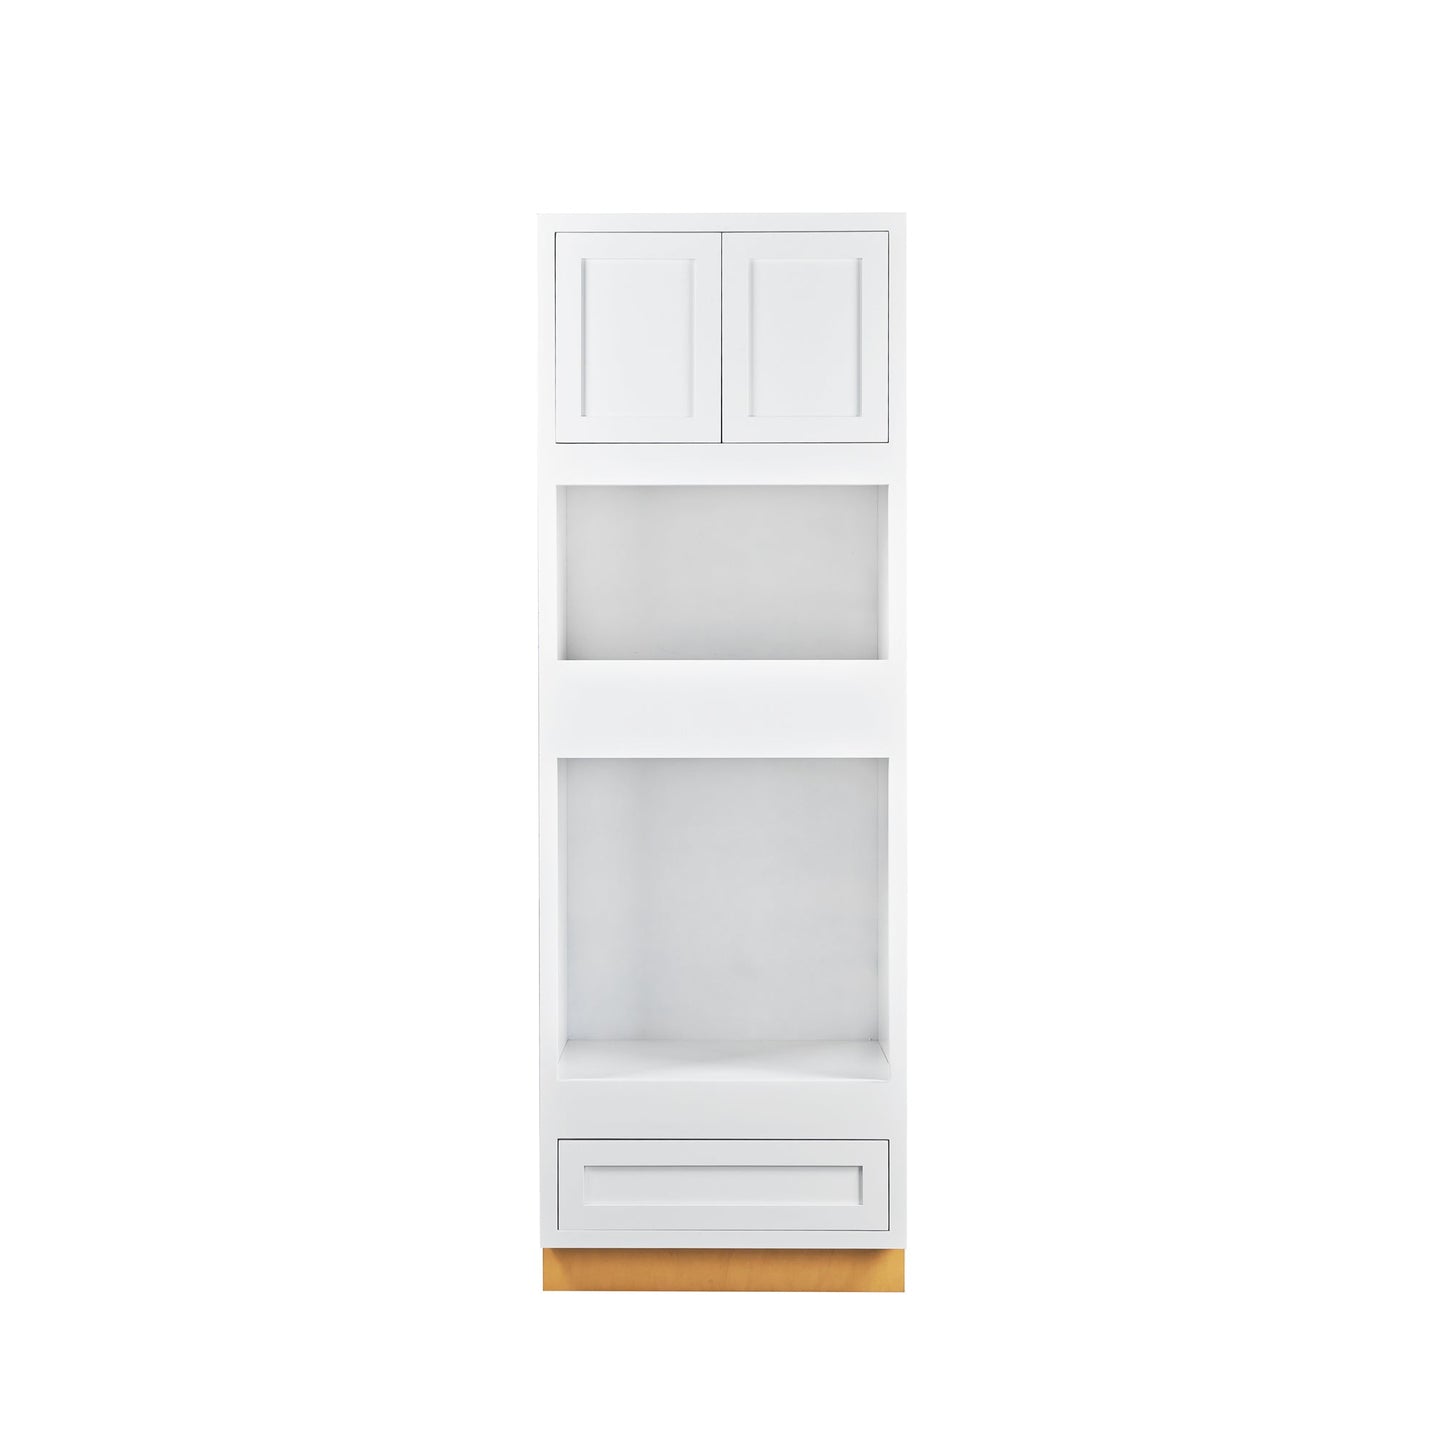 Maplevilles Cabinetry 31" x 93" Snow White Inset Modern Shaker Style RTA Birch Wood Double Oven Pantry Cabinet With 2 Doors & 1 Drawer